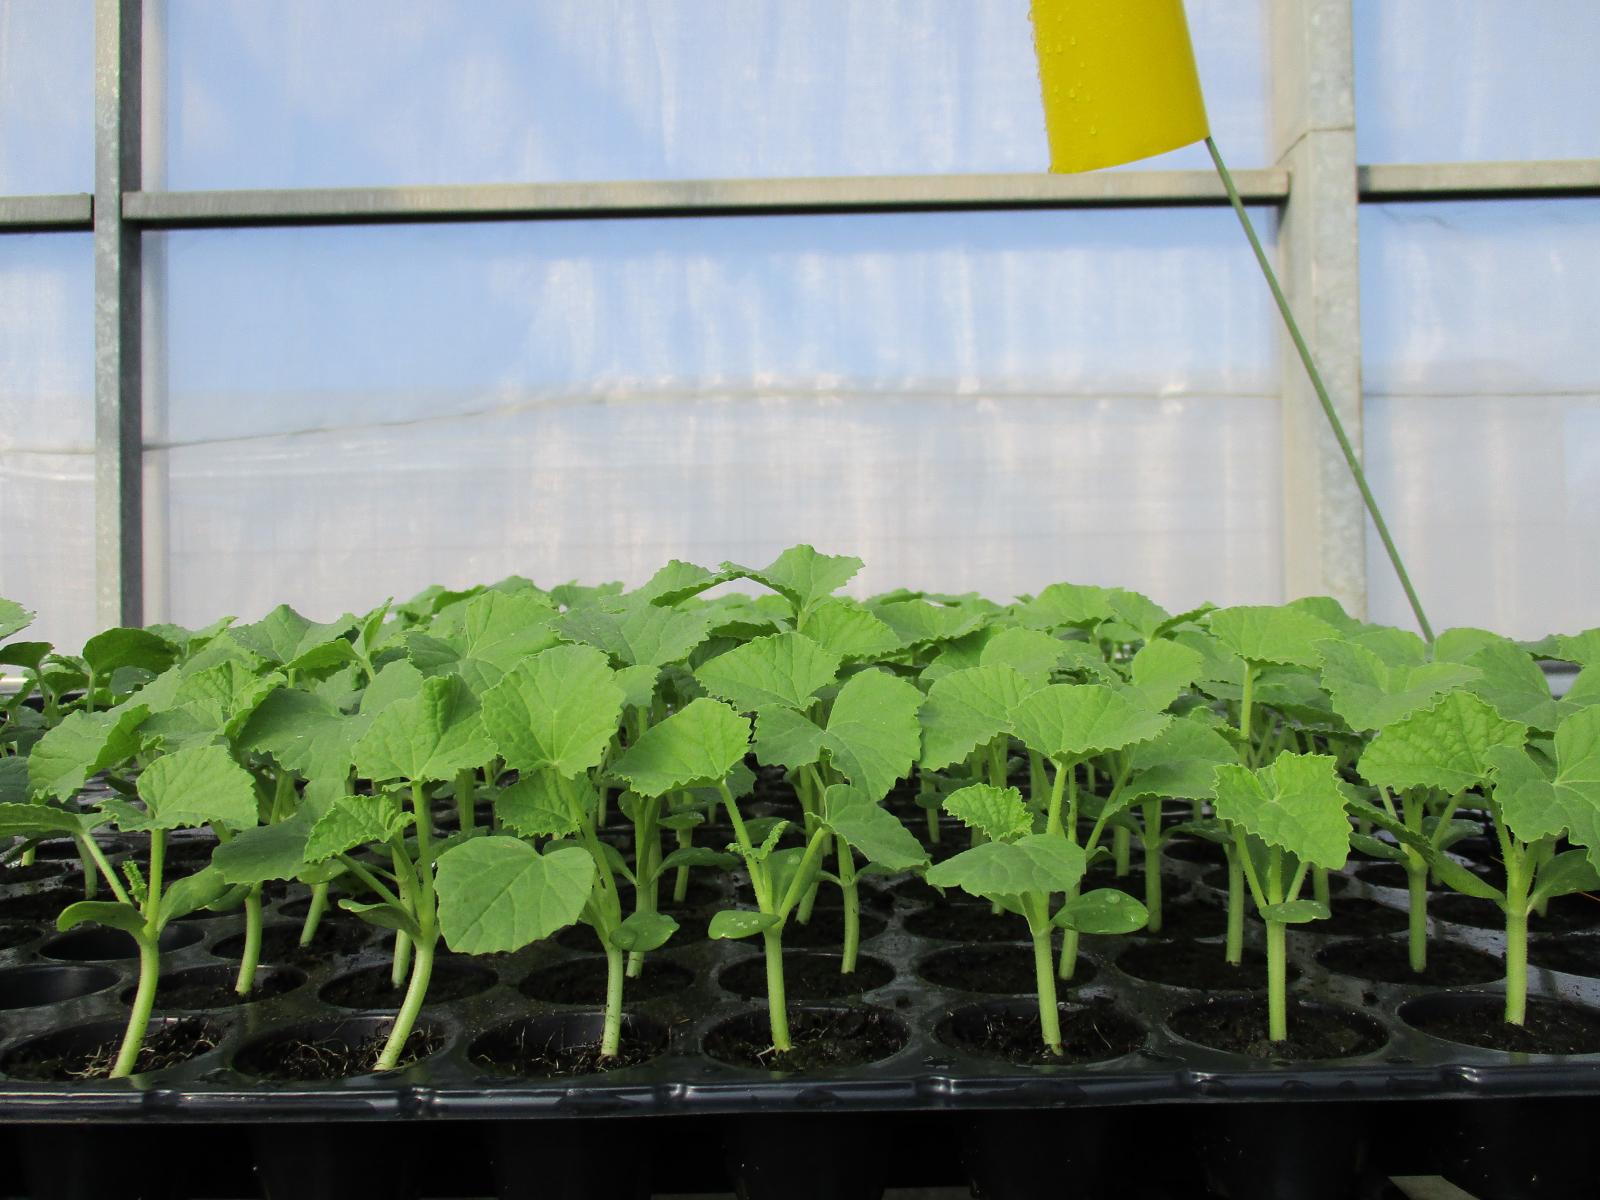 The detection of ZYMV on melon seedlings is virus free.